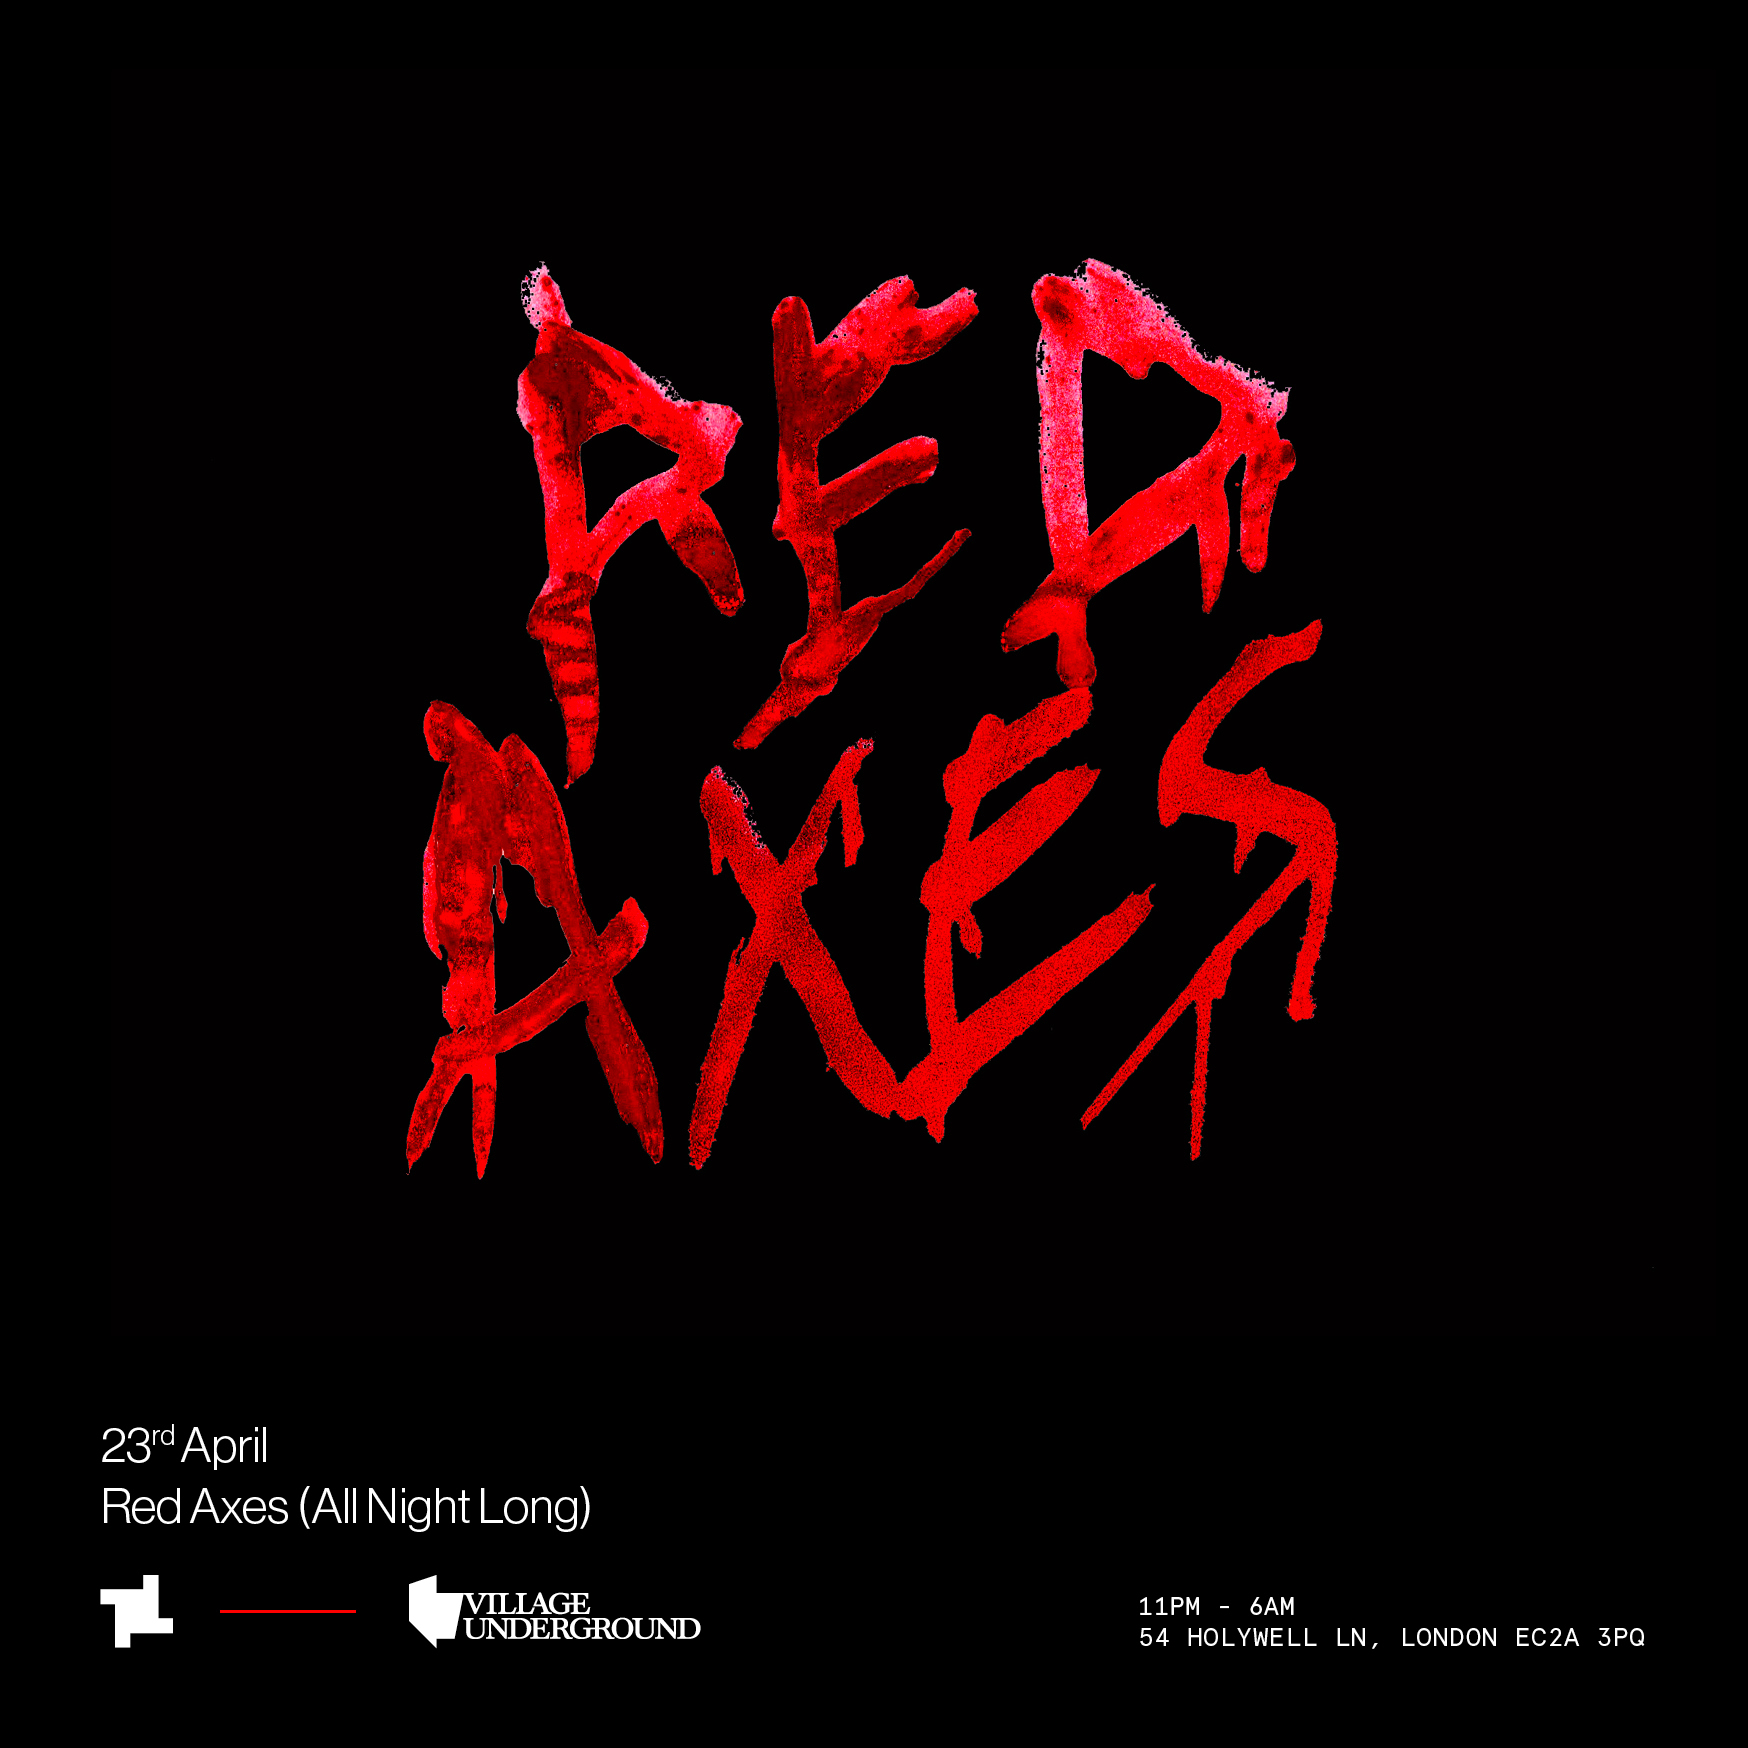 fabric presents: Red Axes (All Night Long) at Village Underground - Flyer front